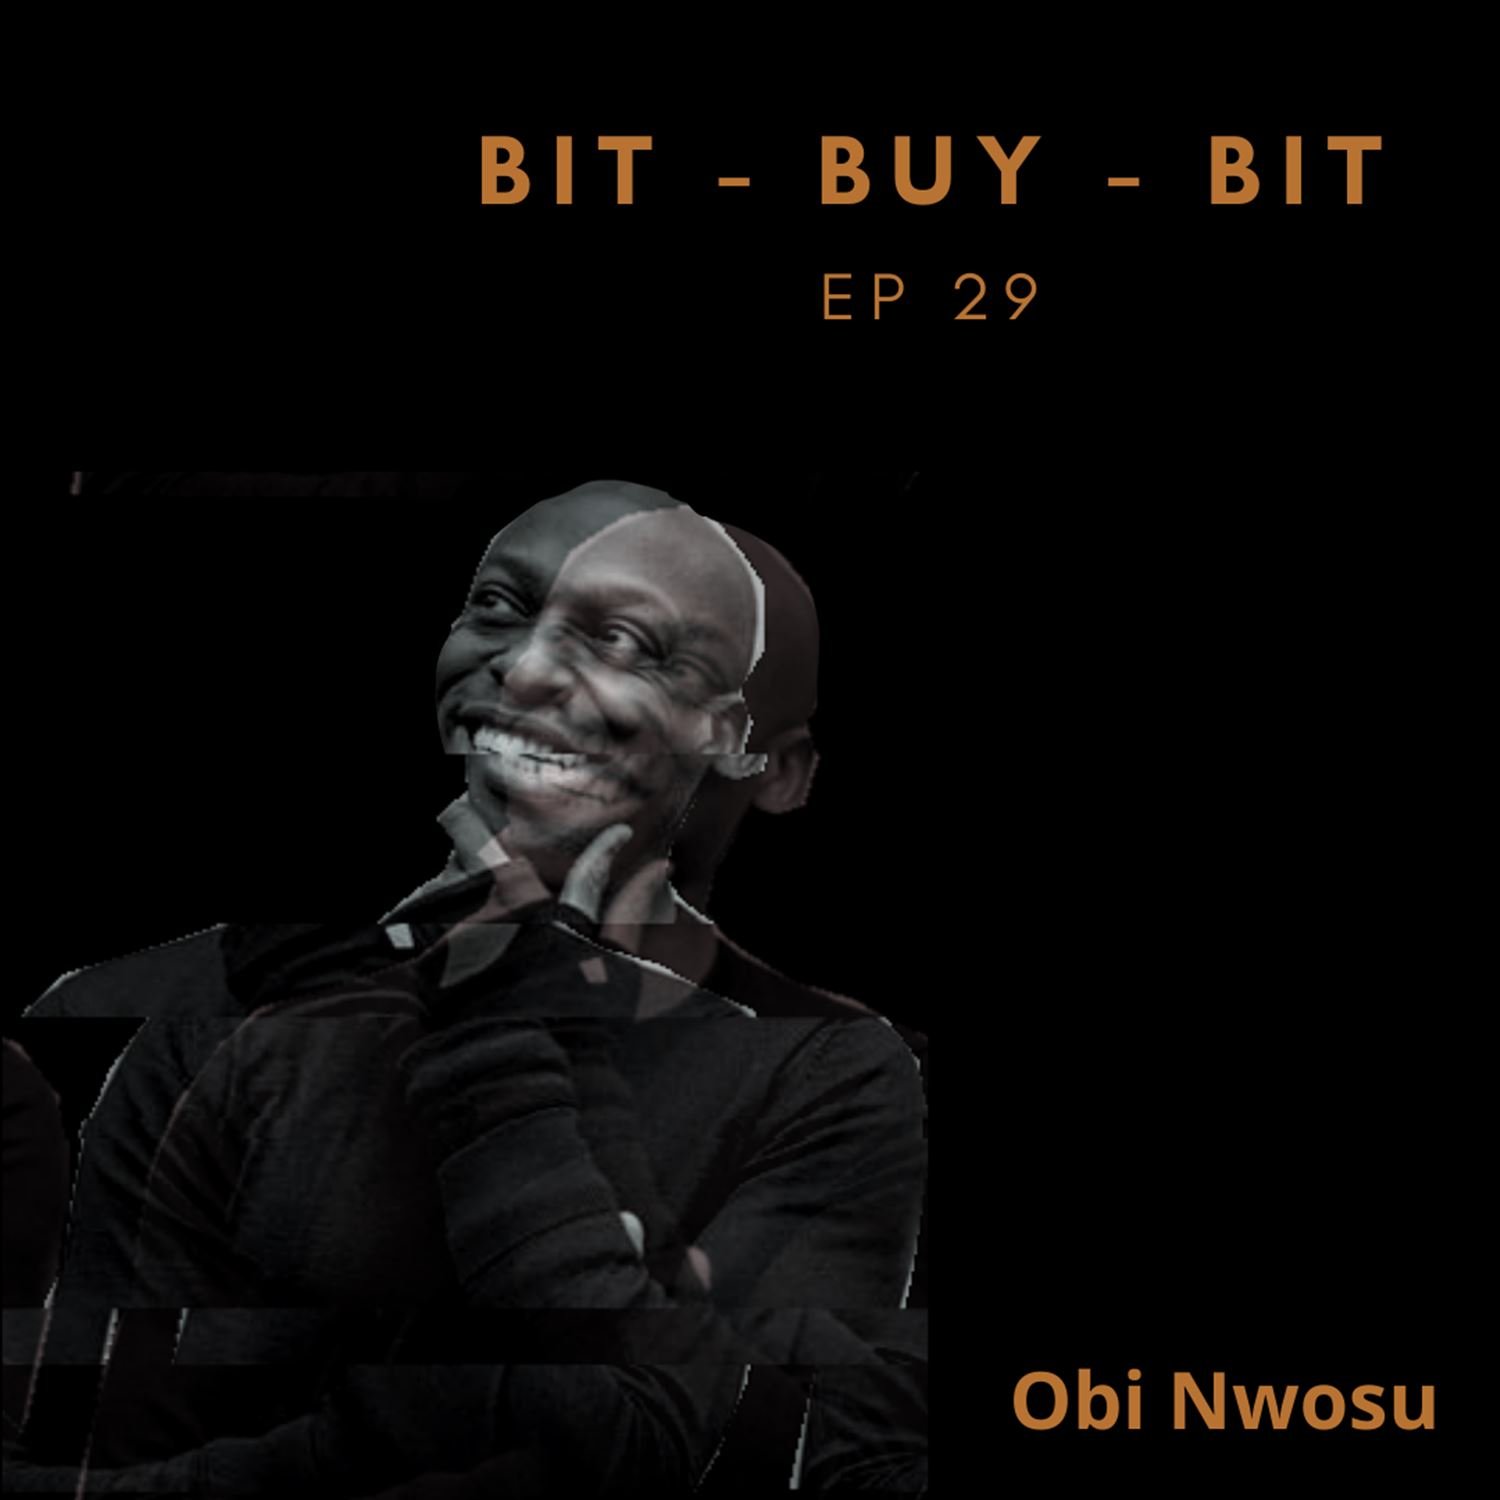 EP29 Bitcoin podcast with Obi Nwosu the CEO of Coinfloor. 